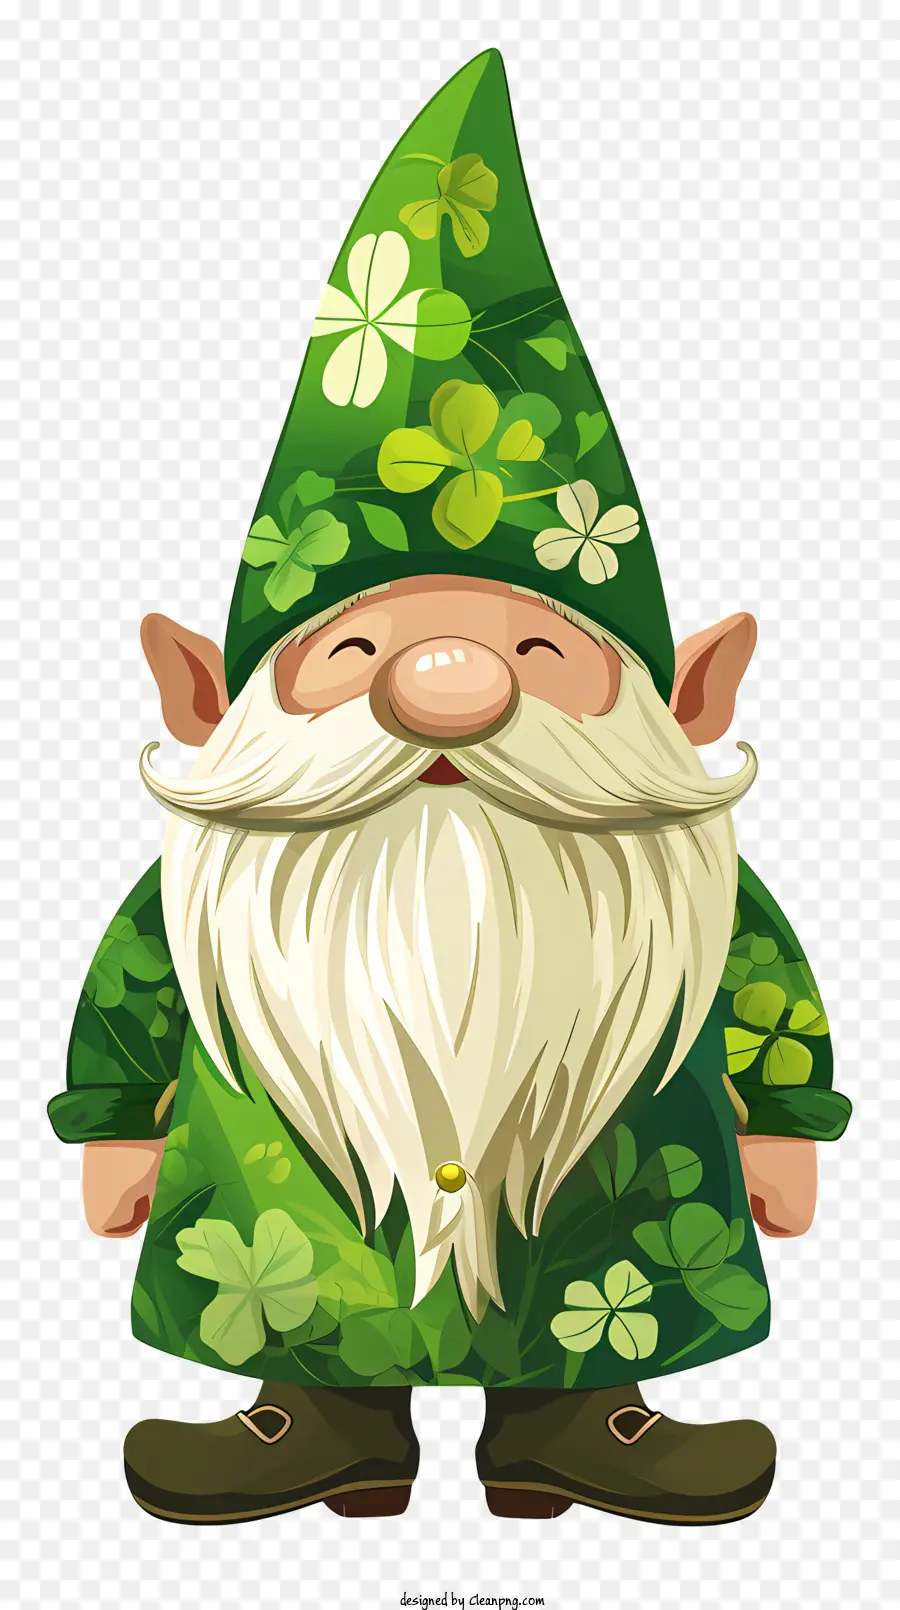 st patric's day gnome cartoon gnome green clothes shamrock pattern green hat